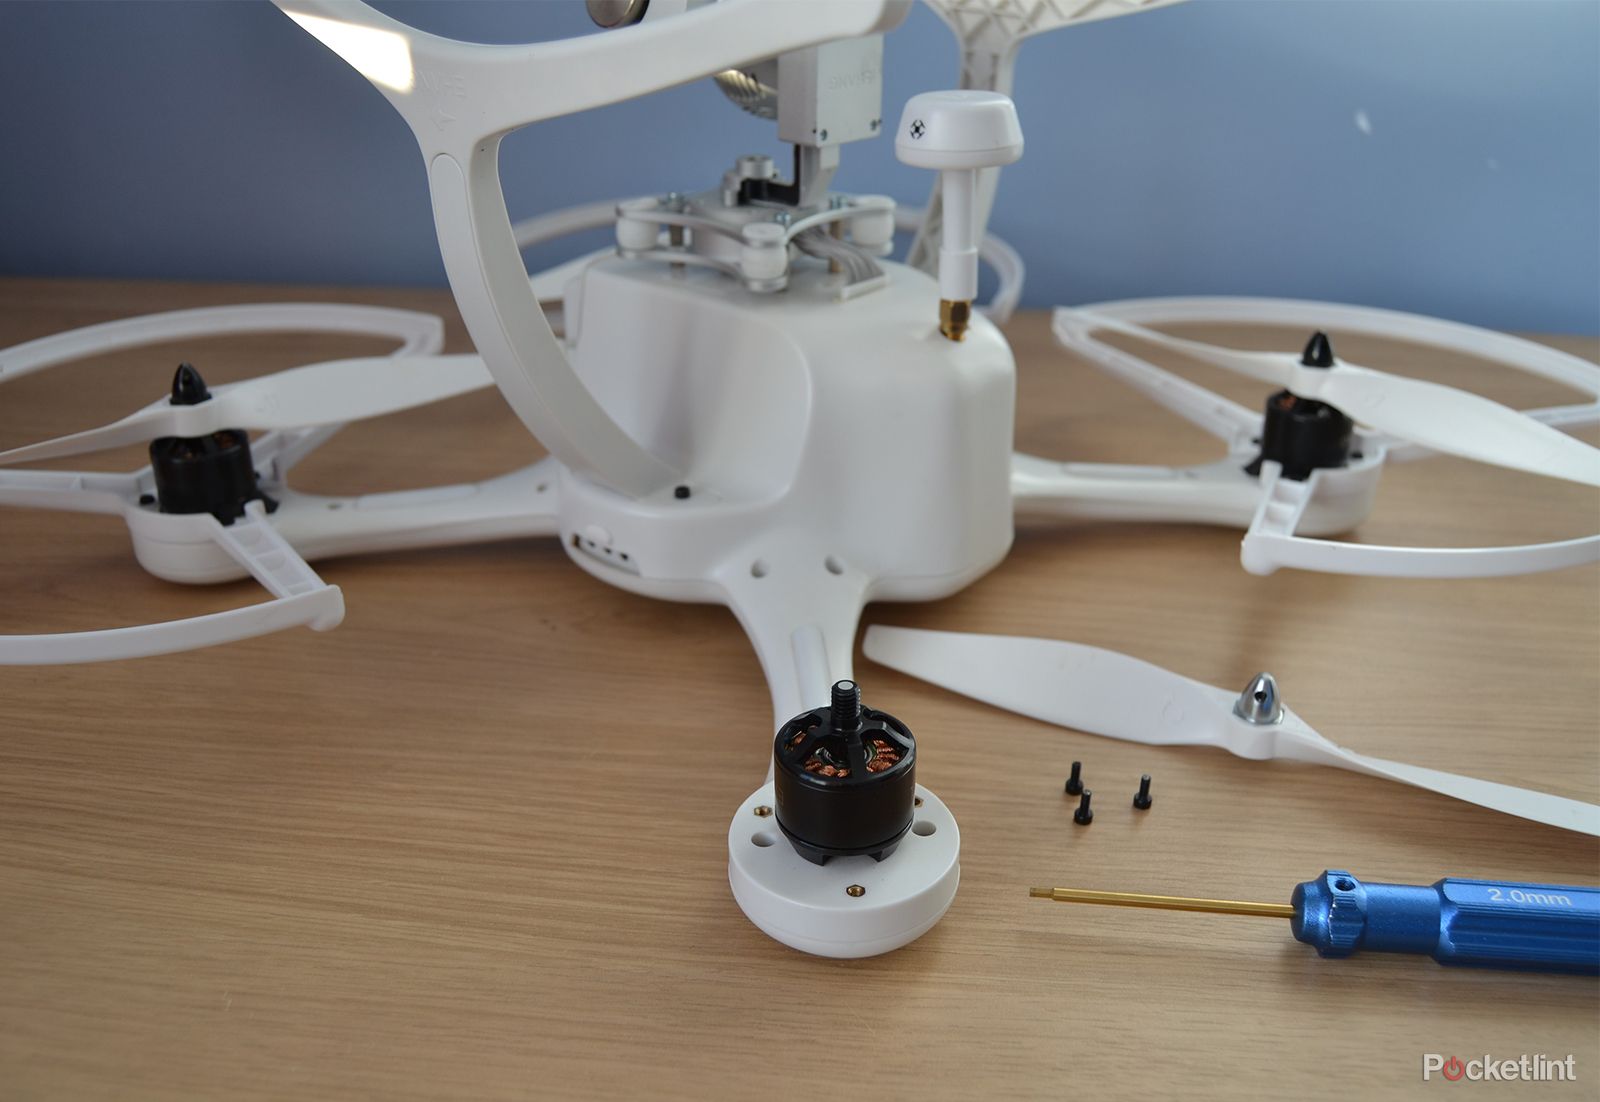 ehang ghostdrone 2 0 vr review image 10